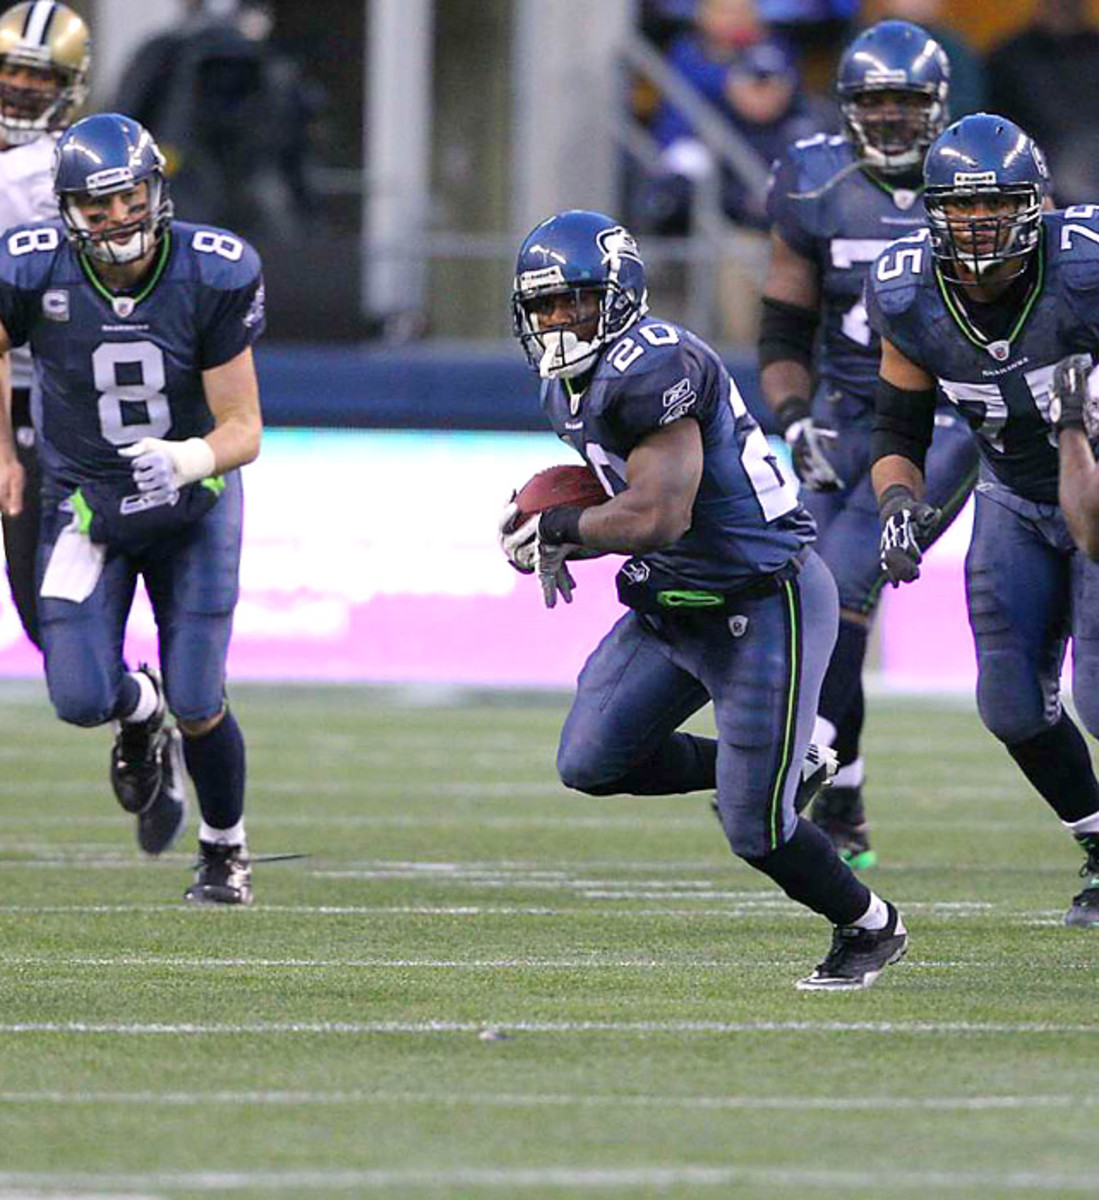 Seattle 41, New Orleans 36